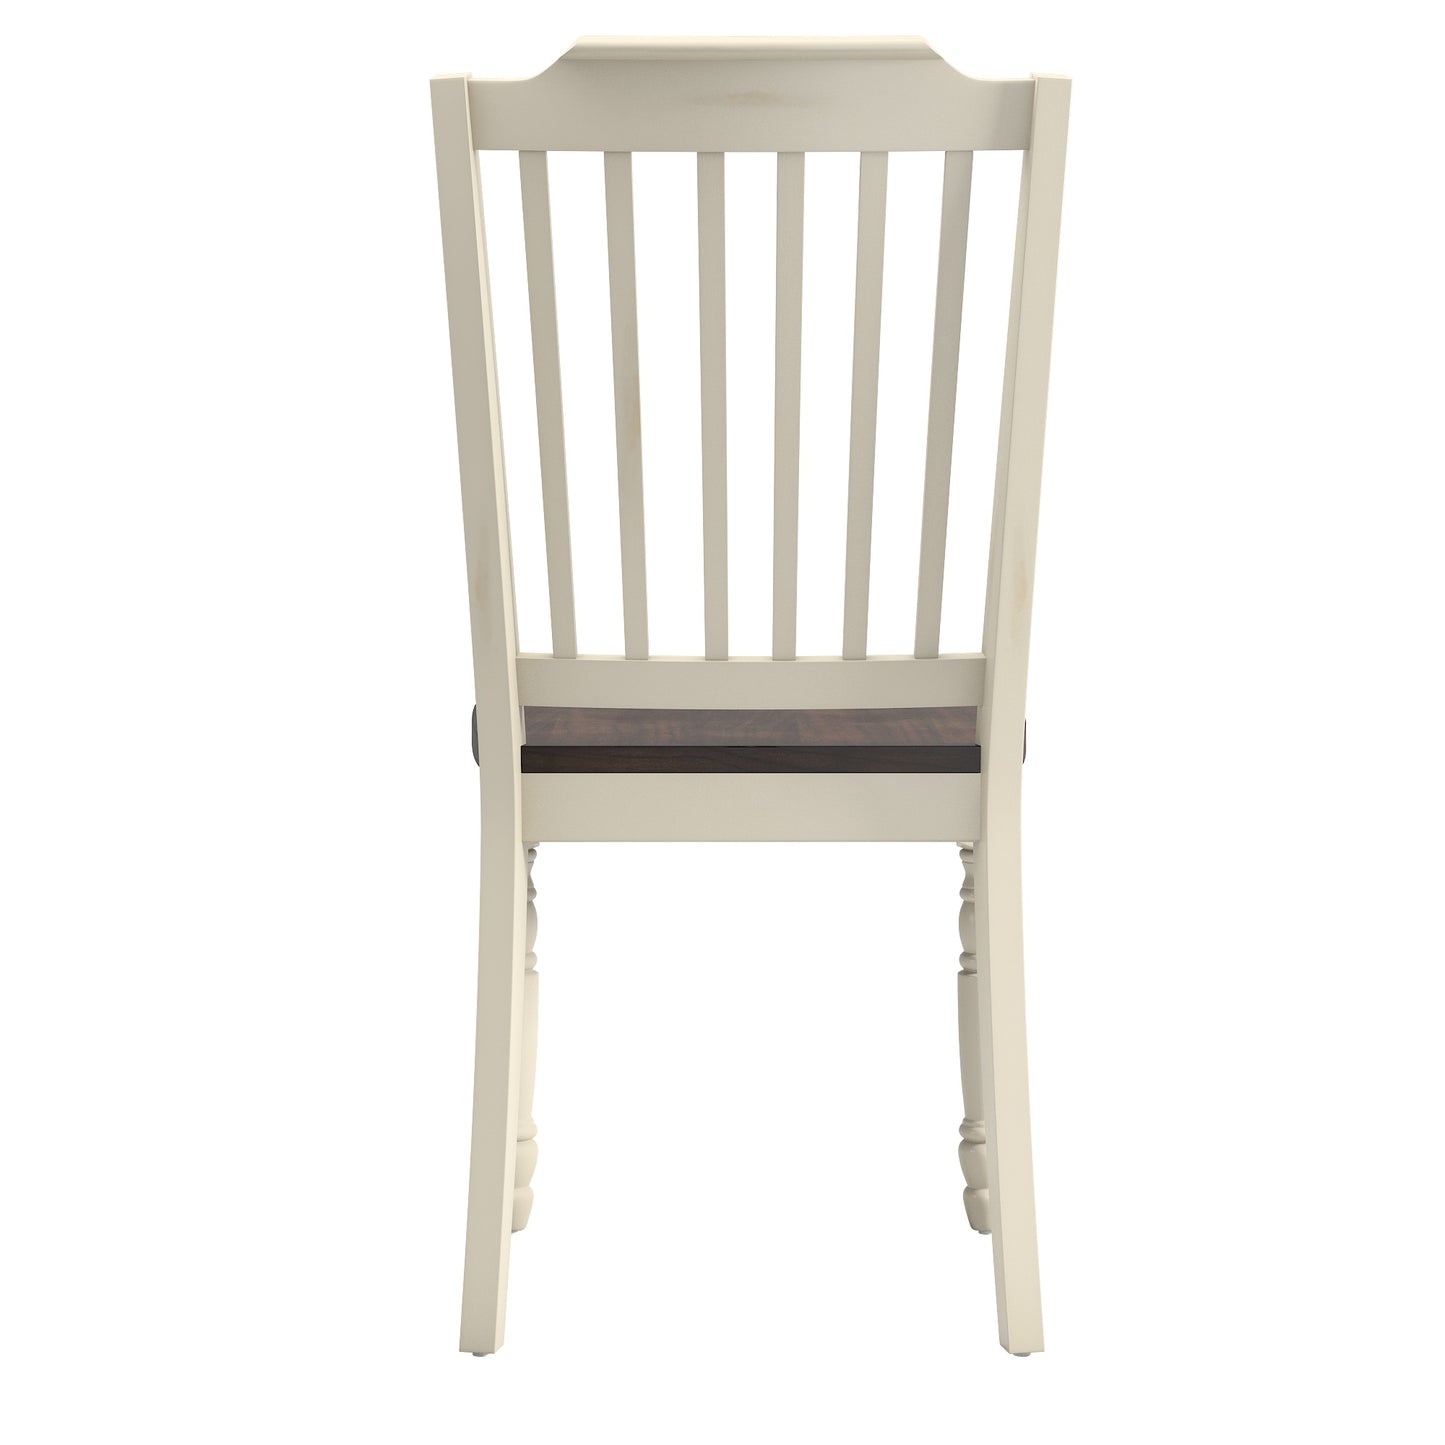 Two-Tone Antique Dining Chairs (Set of 2) - Antique White, Slat Back